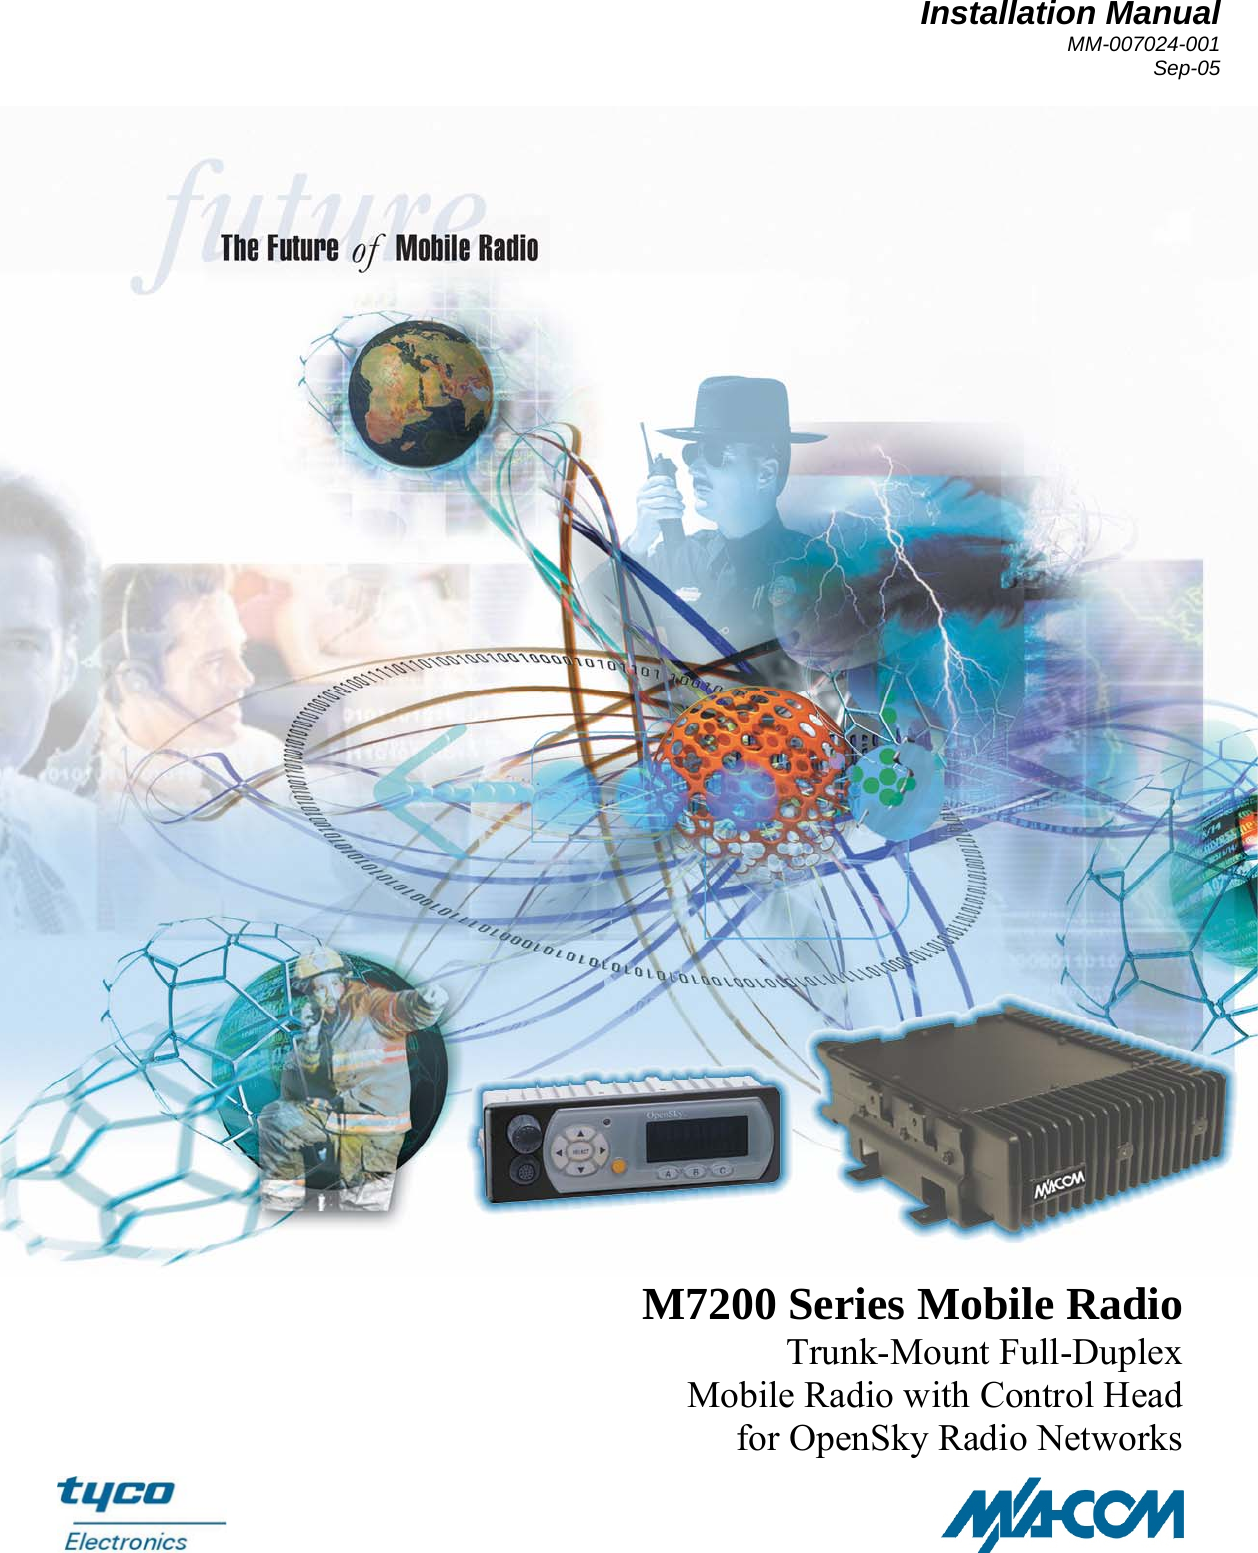 Installation Manual MM-007024-001 Sep-05  M7200 Series Mobile Radio Trunk-Mount Full-Duplex Mobile Radio with Control Head for OpenSky Radio Networks 